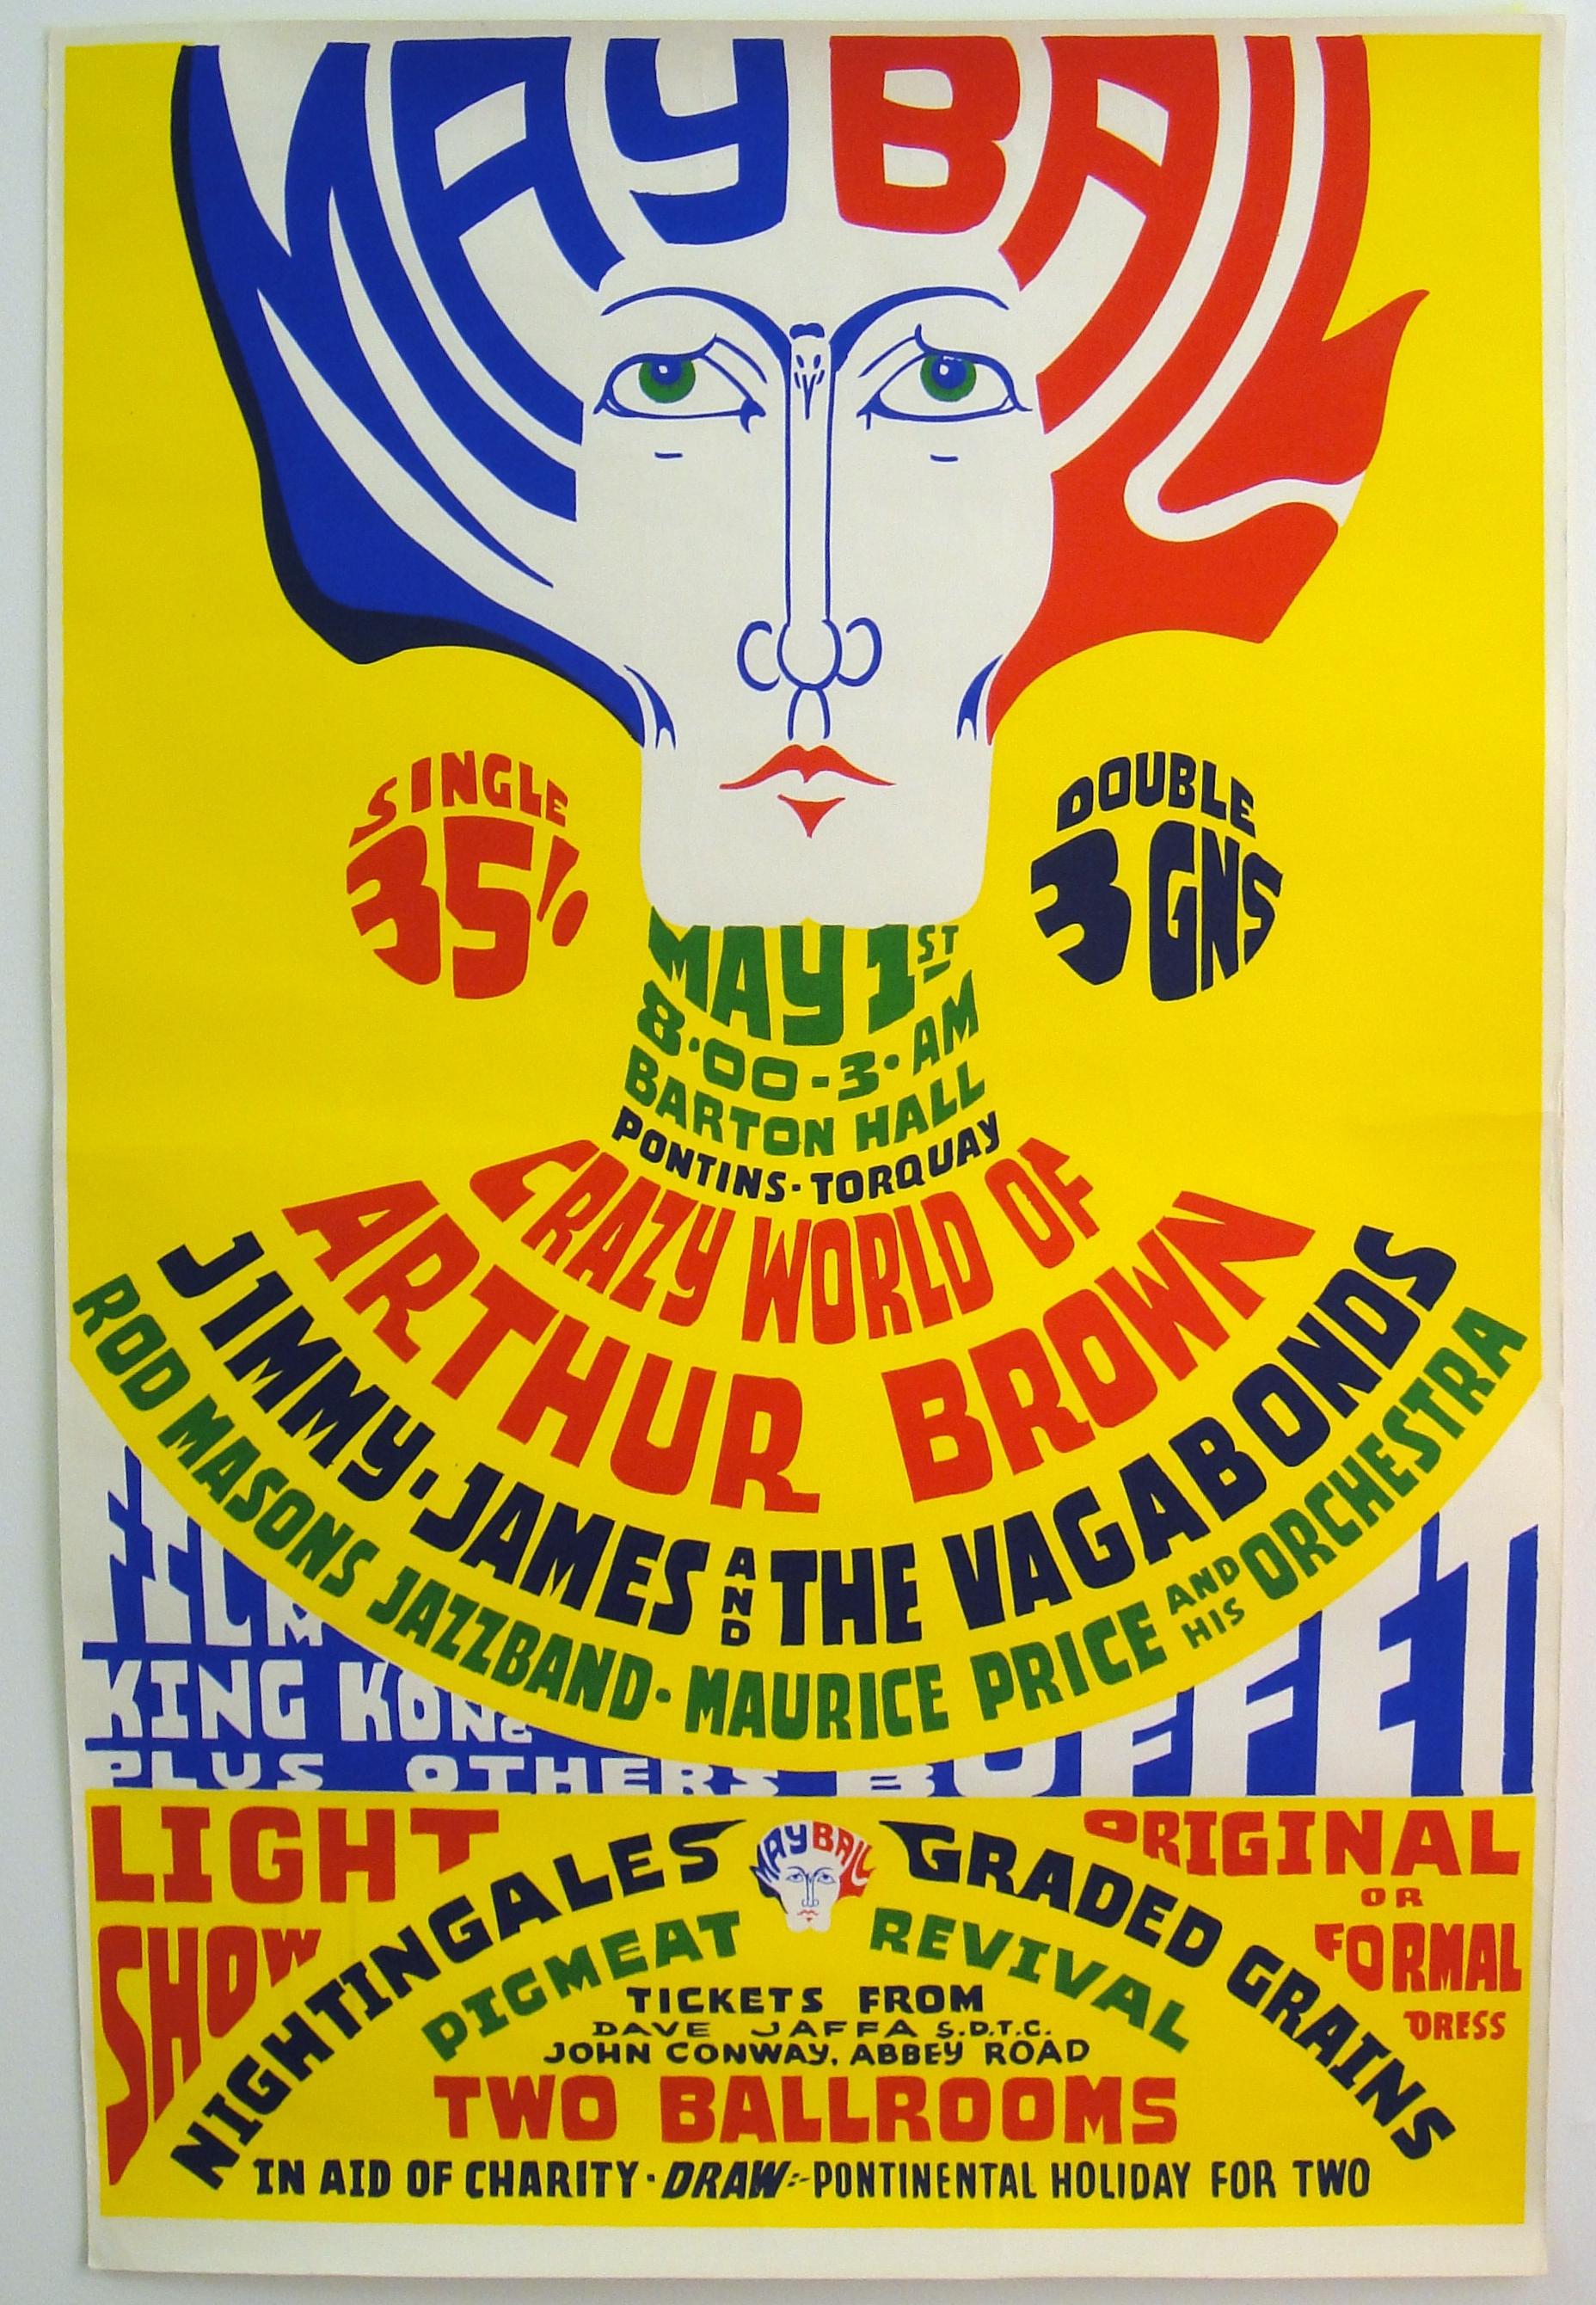 - A rare original poster for the Pontins May Ball in 1968

- Stars The Crazy World of Arthur Brown, Jimmy James and the Vagabonds and Rod Mason's Jazzband

- A superb piece of memorabilia from the heyday of the great British holiday

Founded